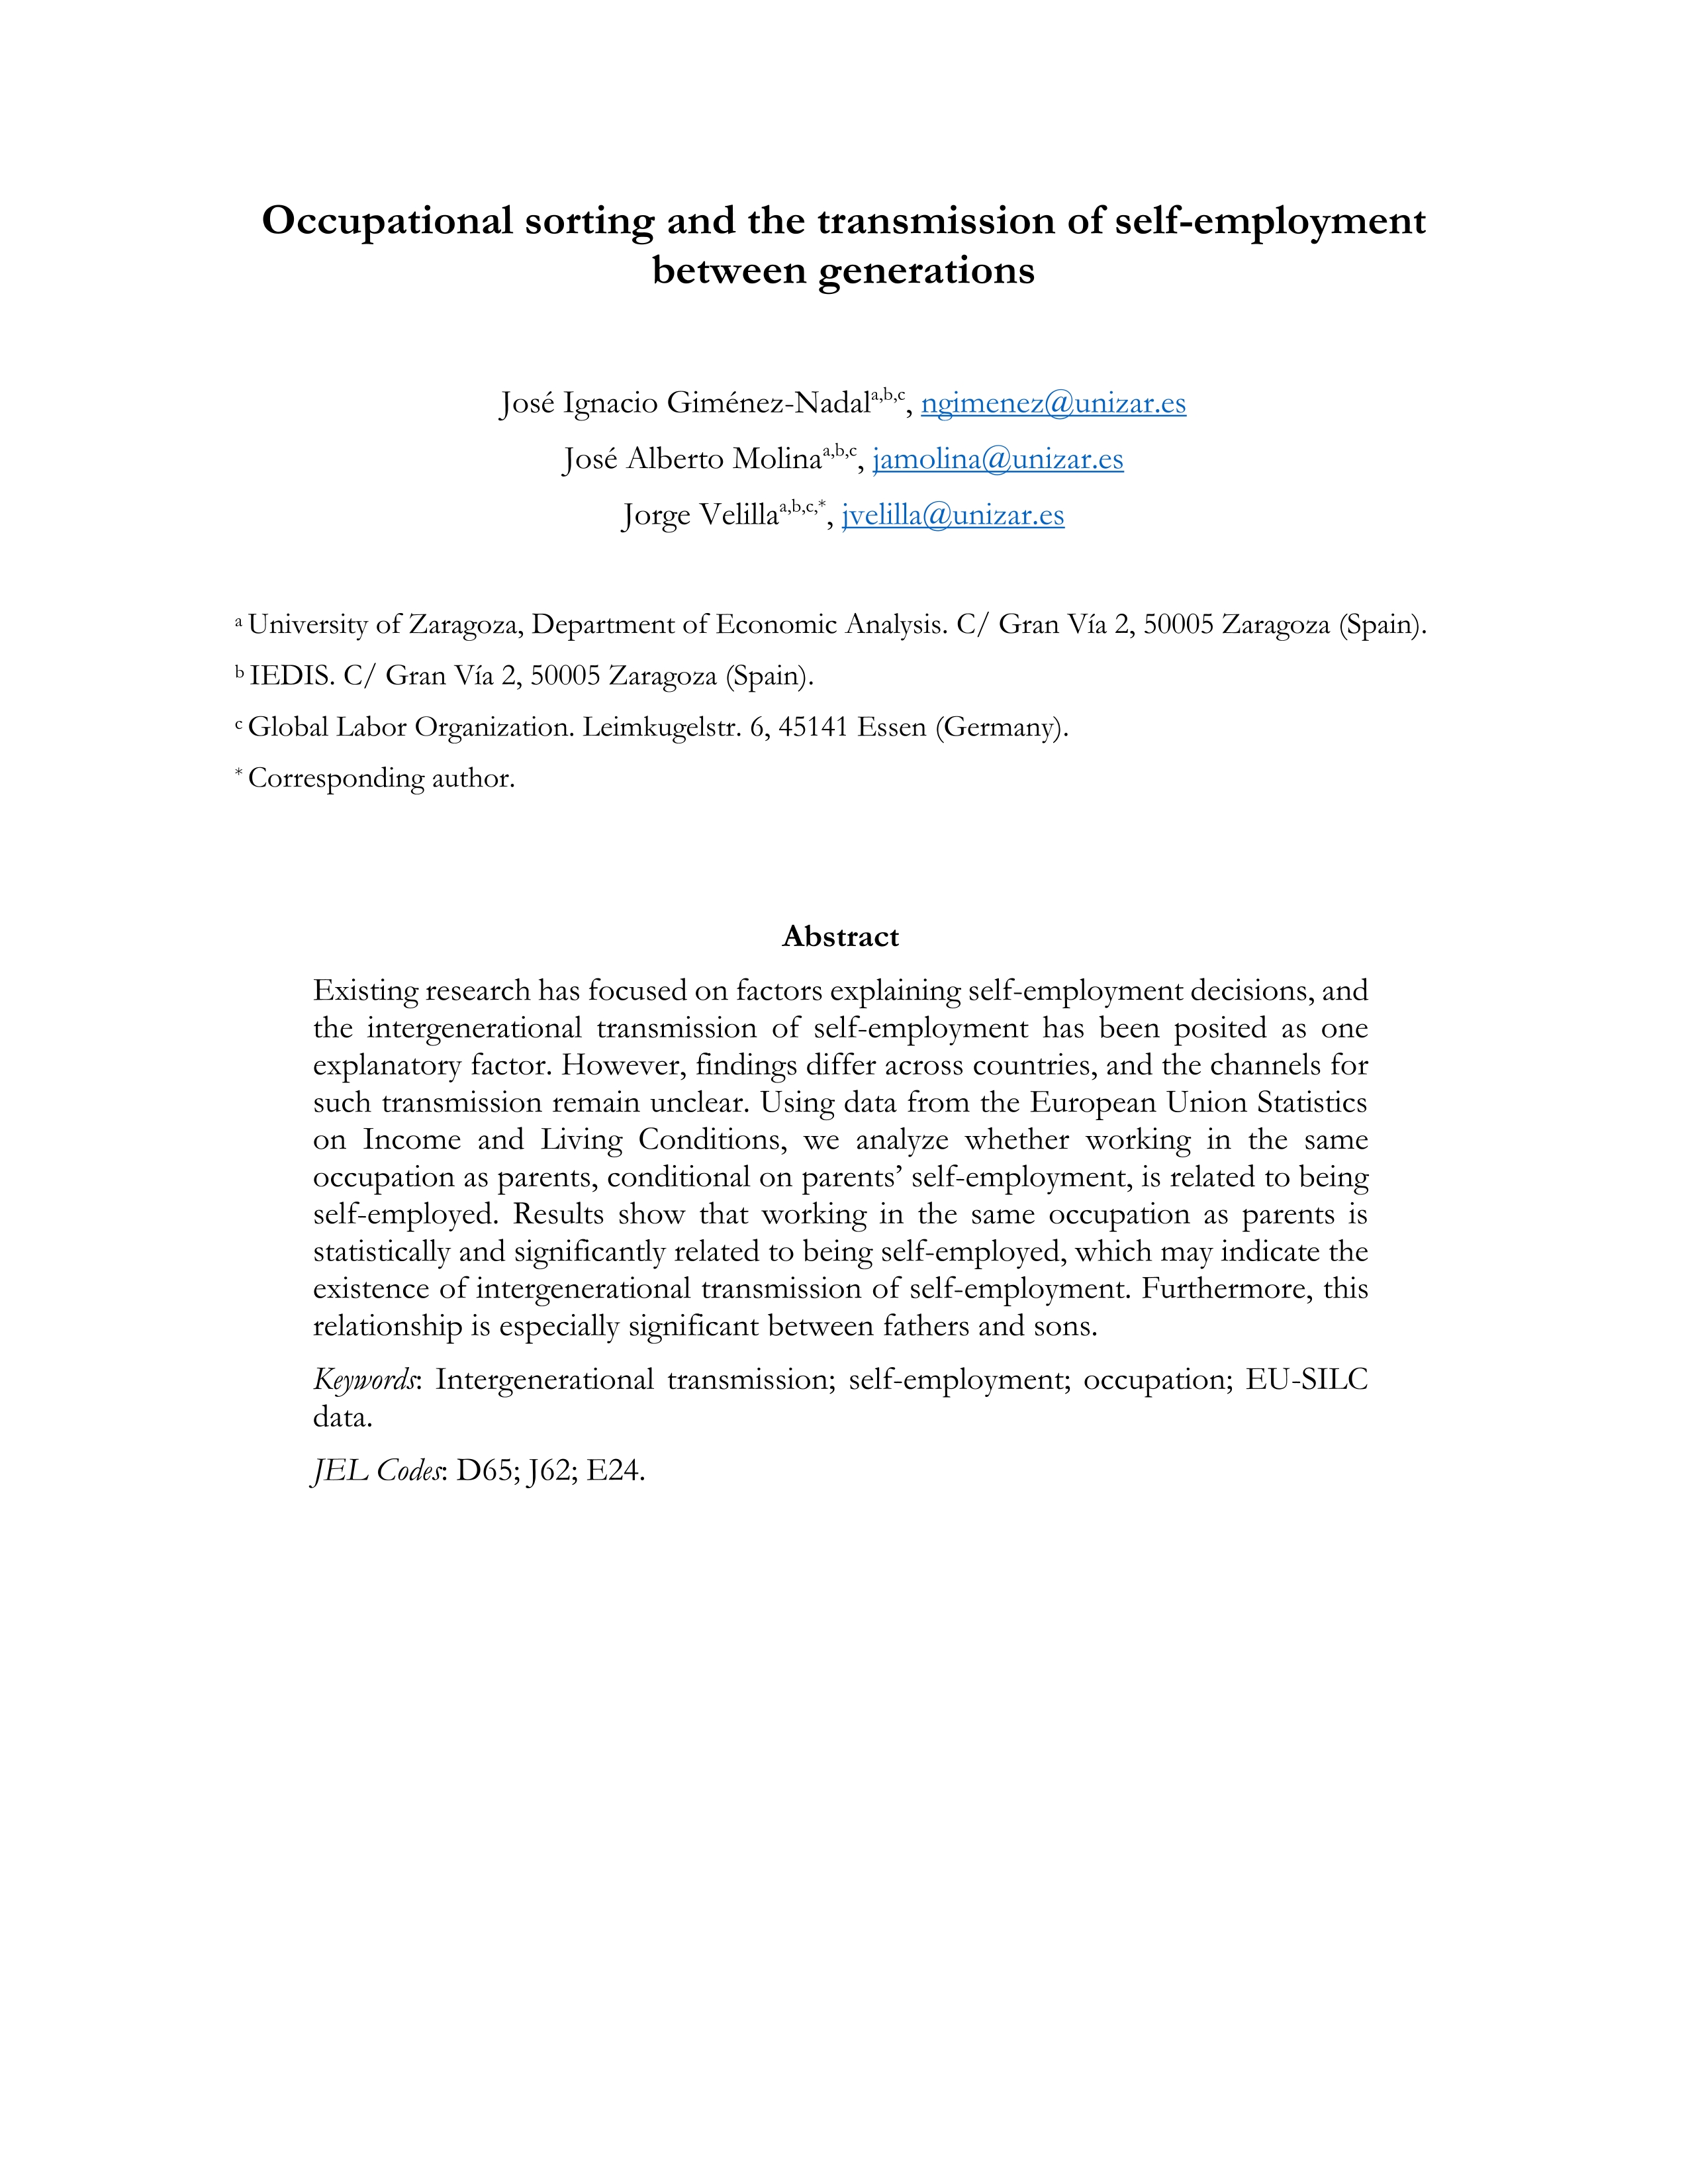 Occupational sorting and the transmission of self-employment between generations